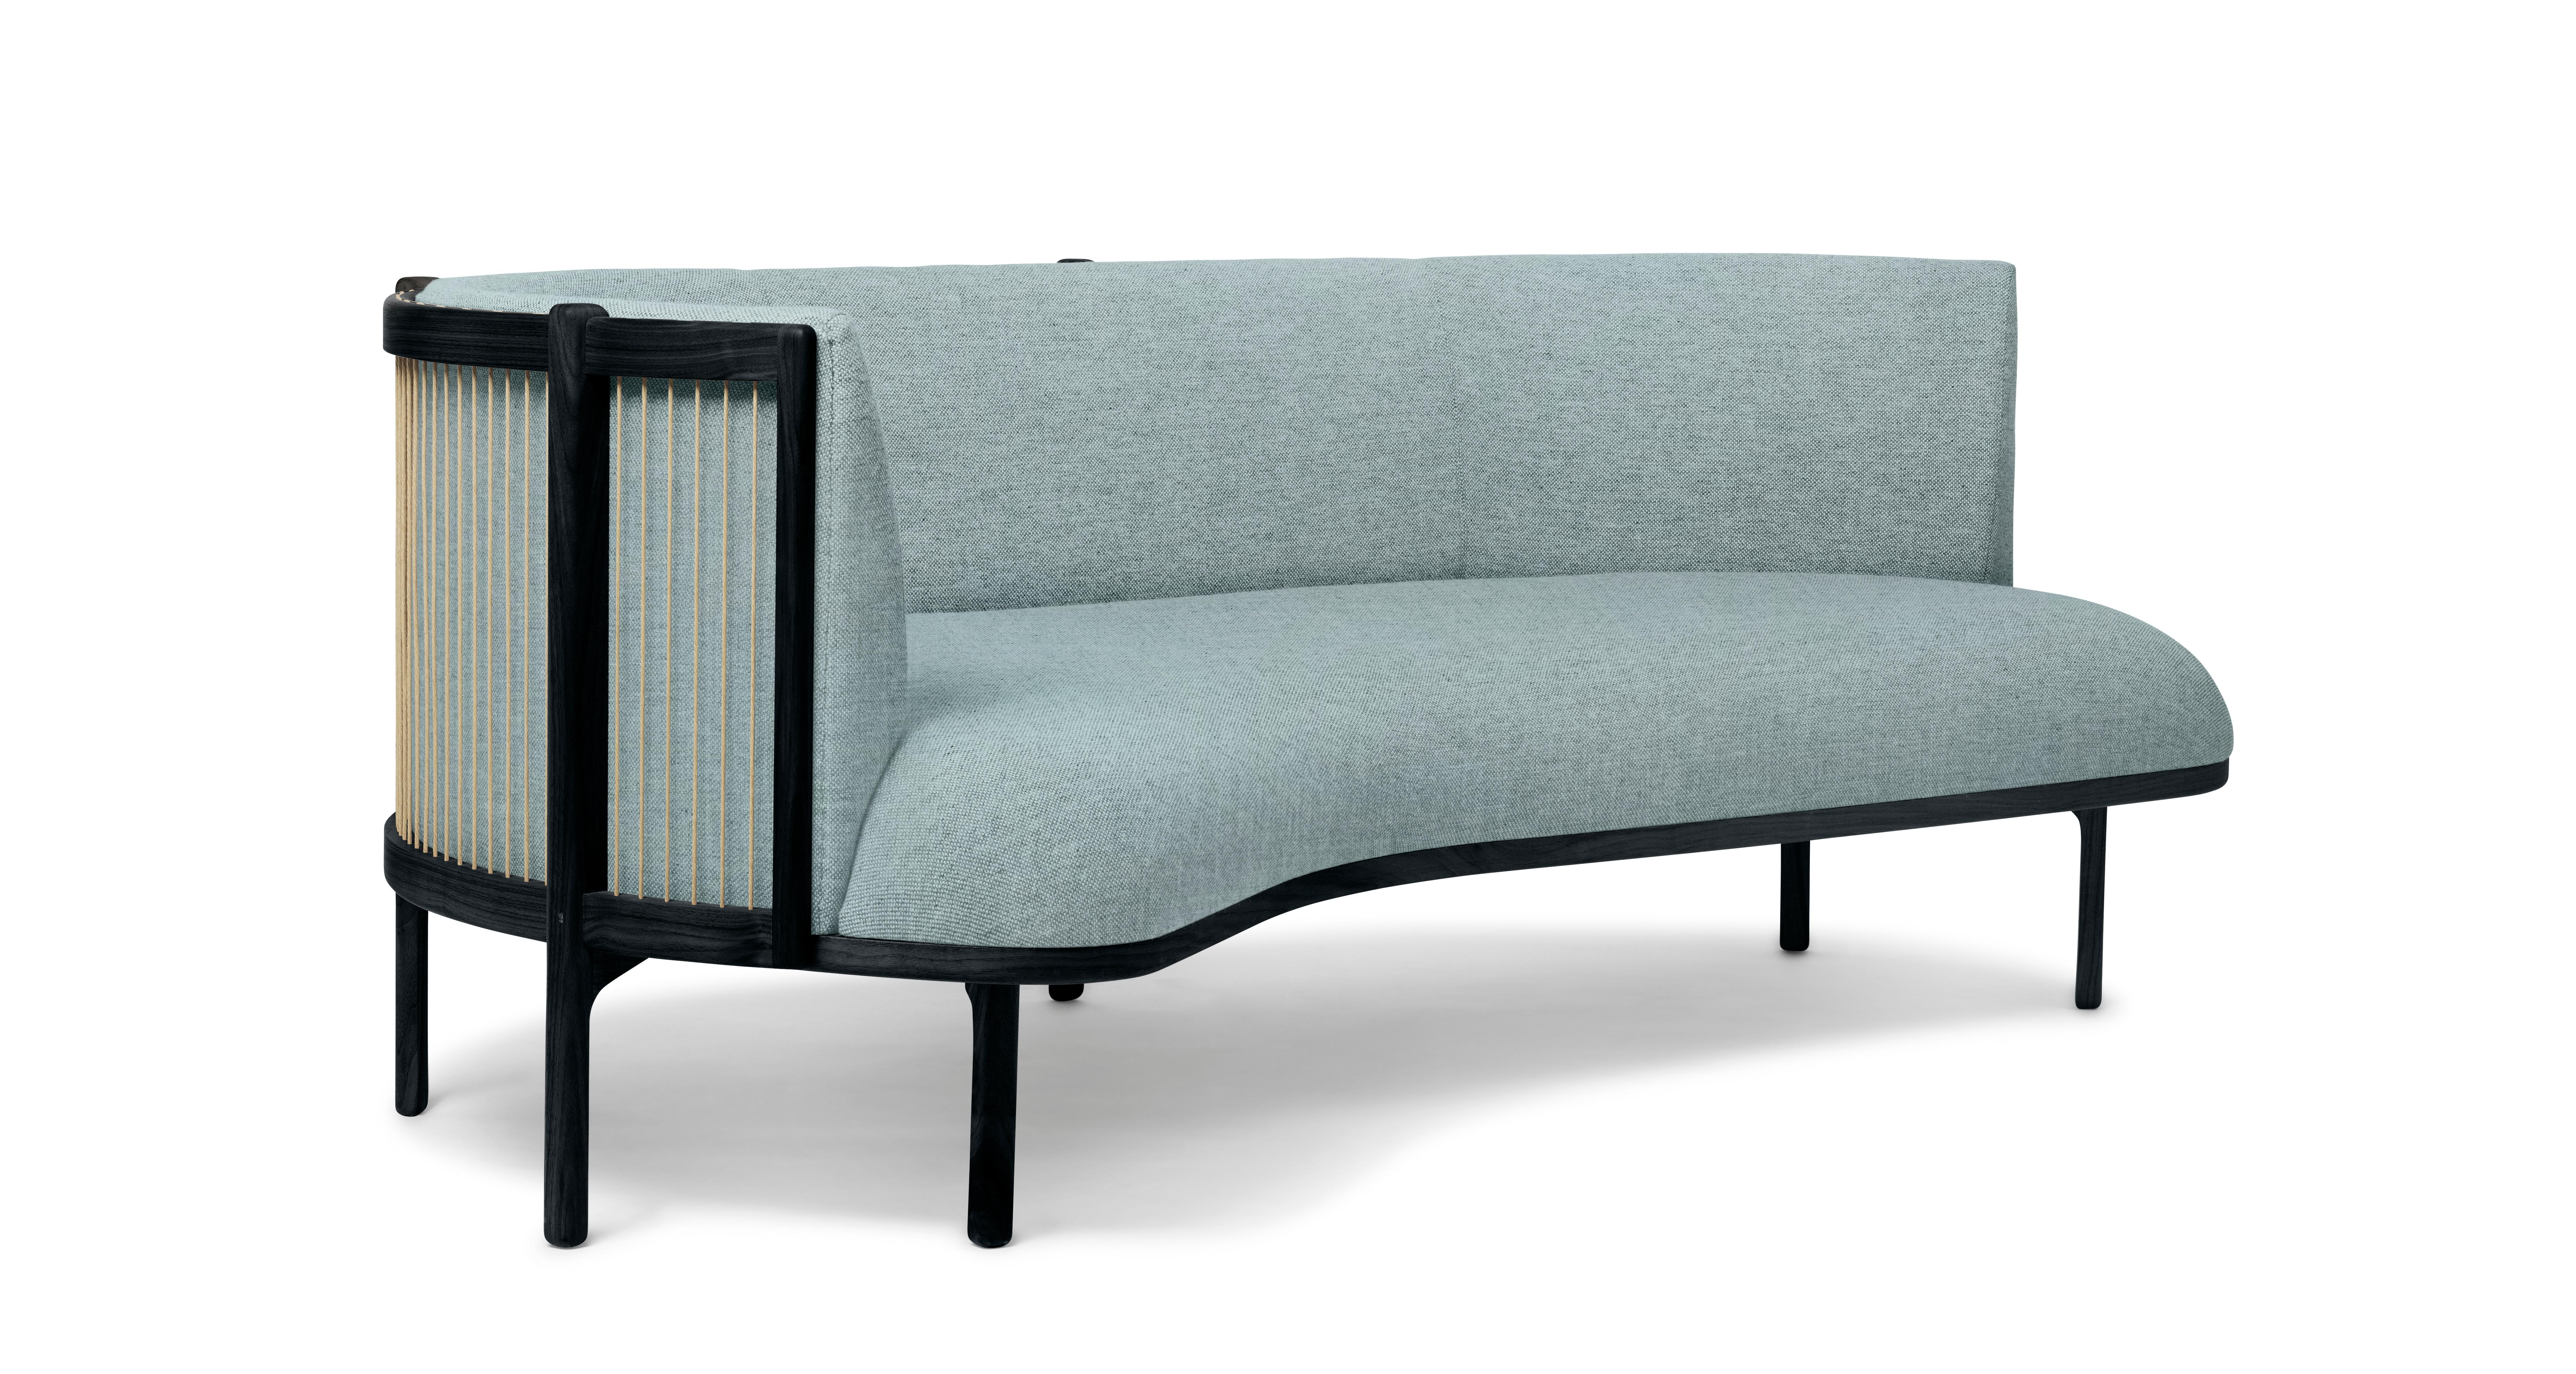 The Sideways sofa from Rikke Frost combines classic materials – wood, paper cord, and high-quality upholstery textile – with a modern asymmetric shape. The steam-bent backrest is shaped from solid wood and woven paper cord for a light, elegant